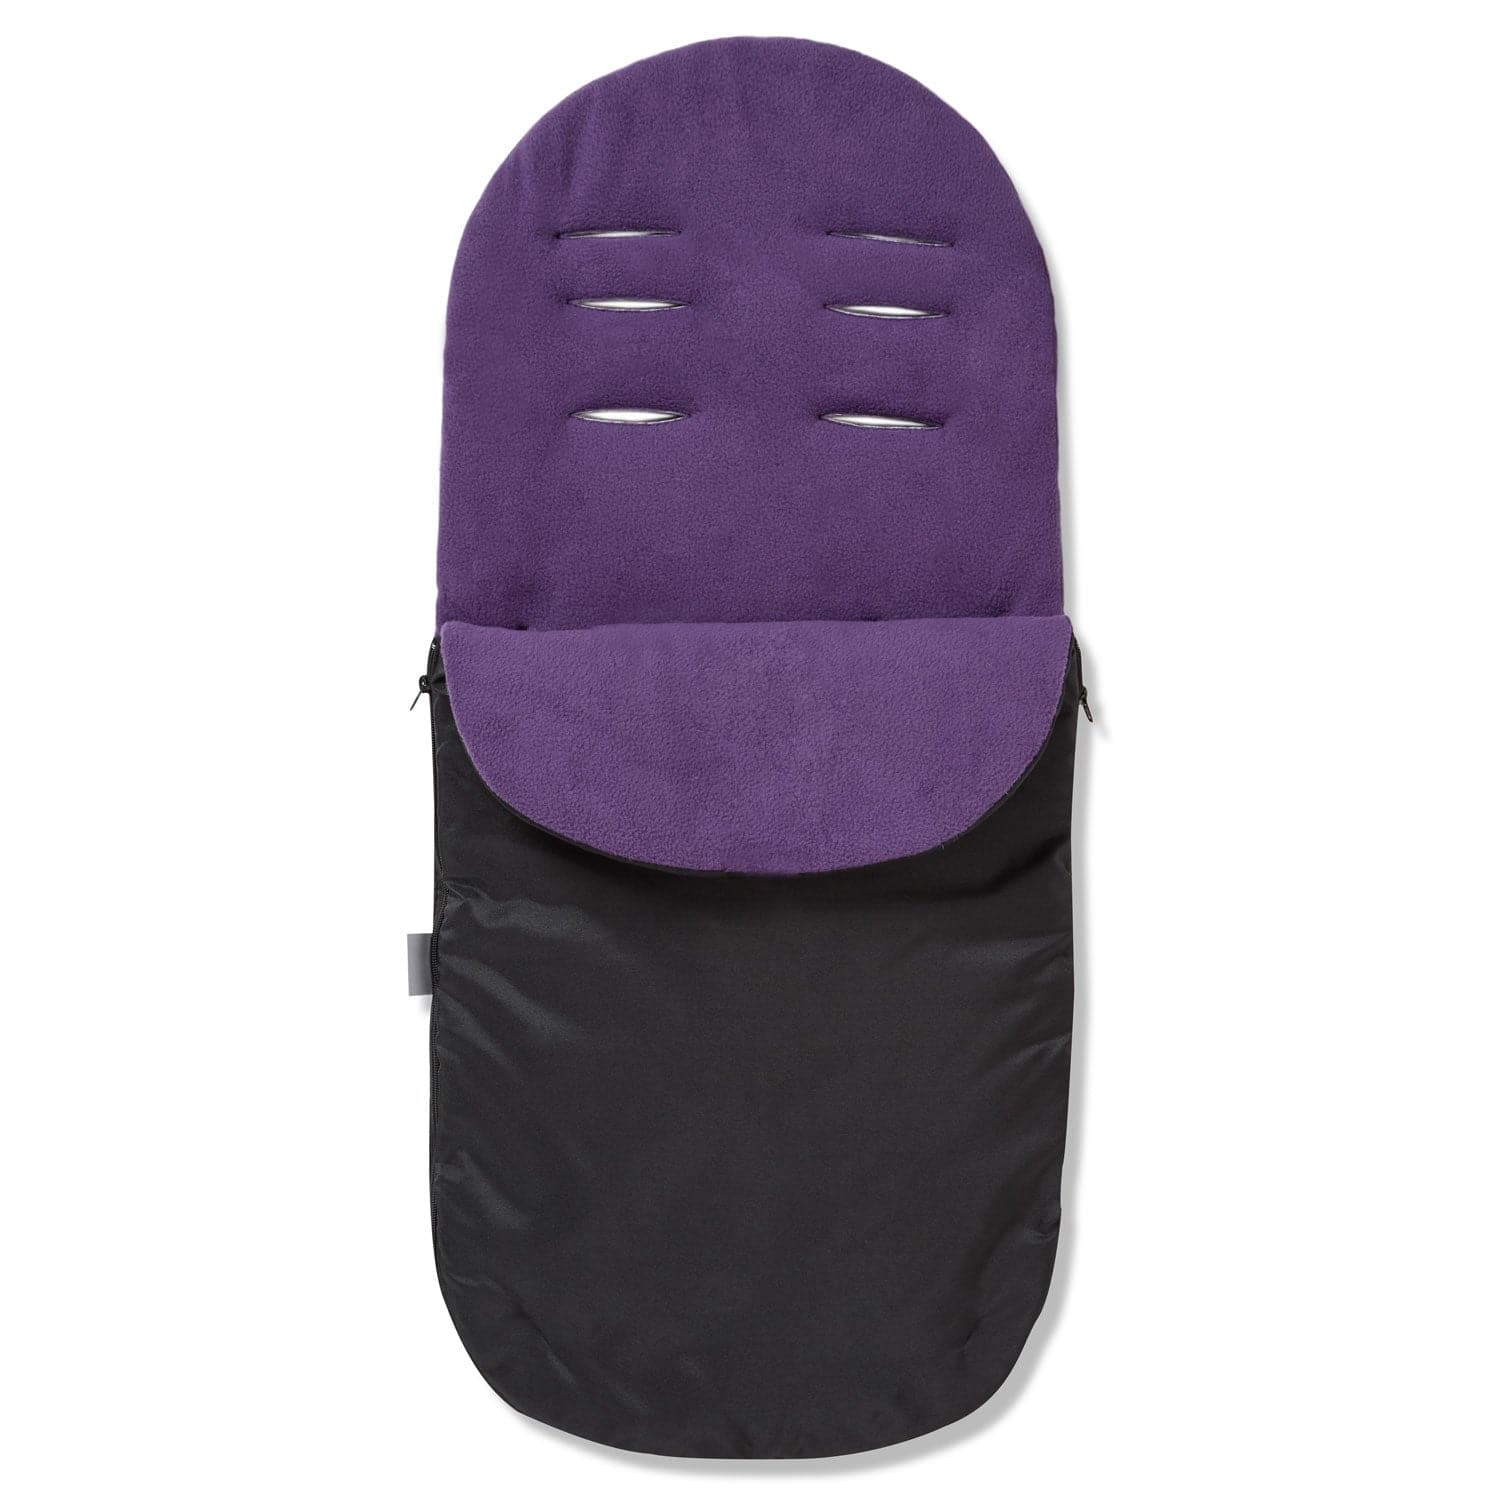 Footmuff / Cosy Toes Compatible with Tippitoes - Purple / Fits All Models | For Your Little One